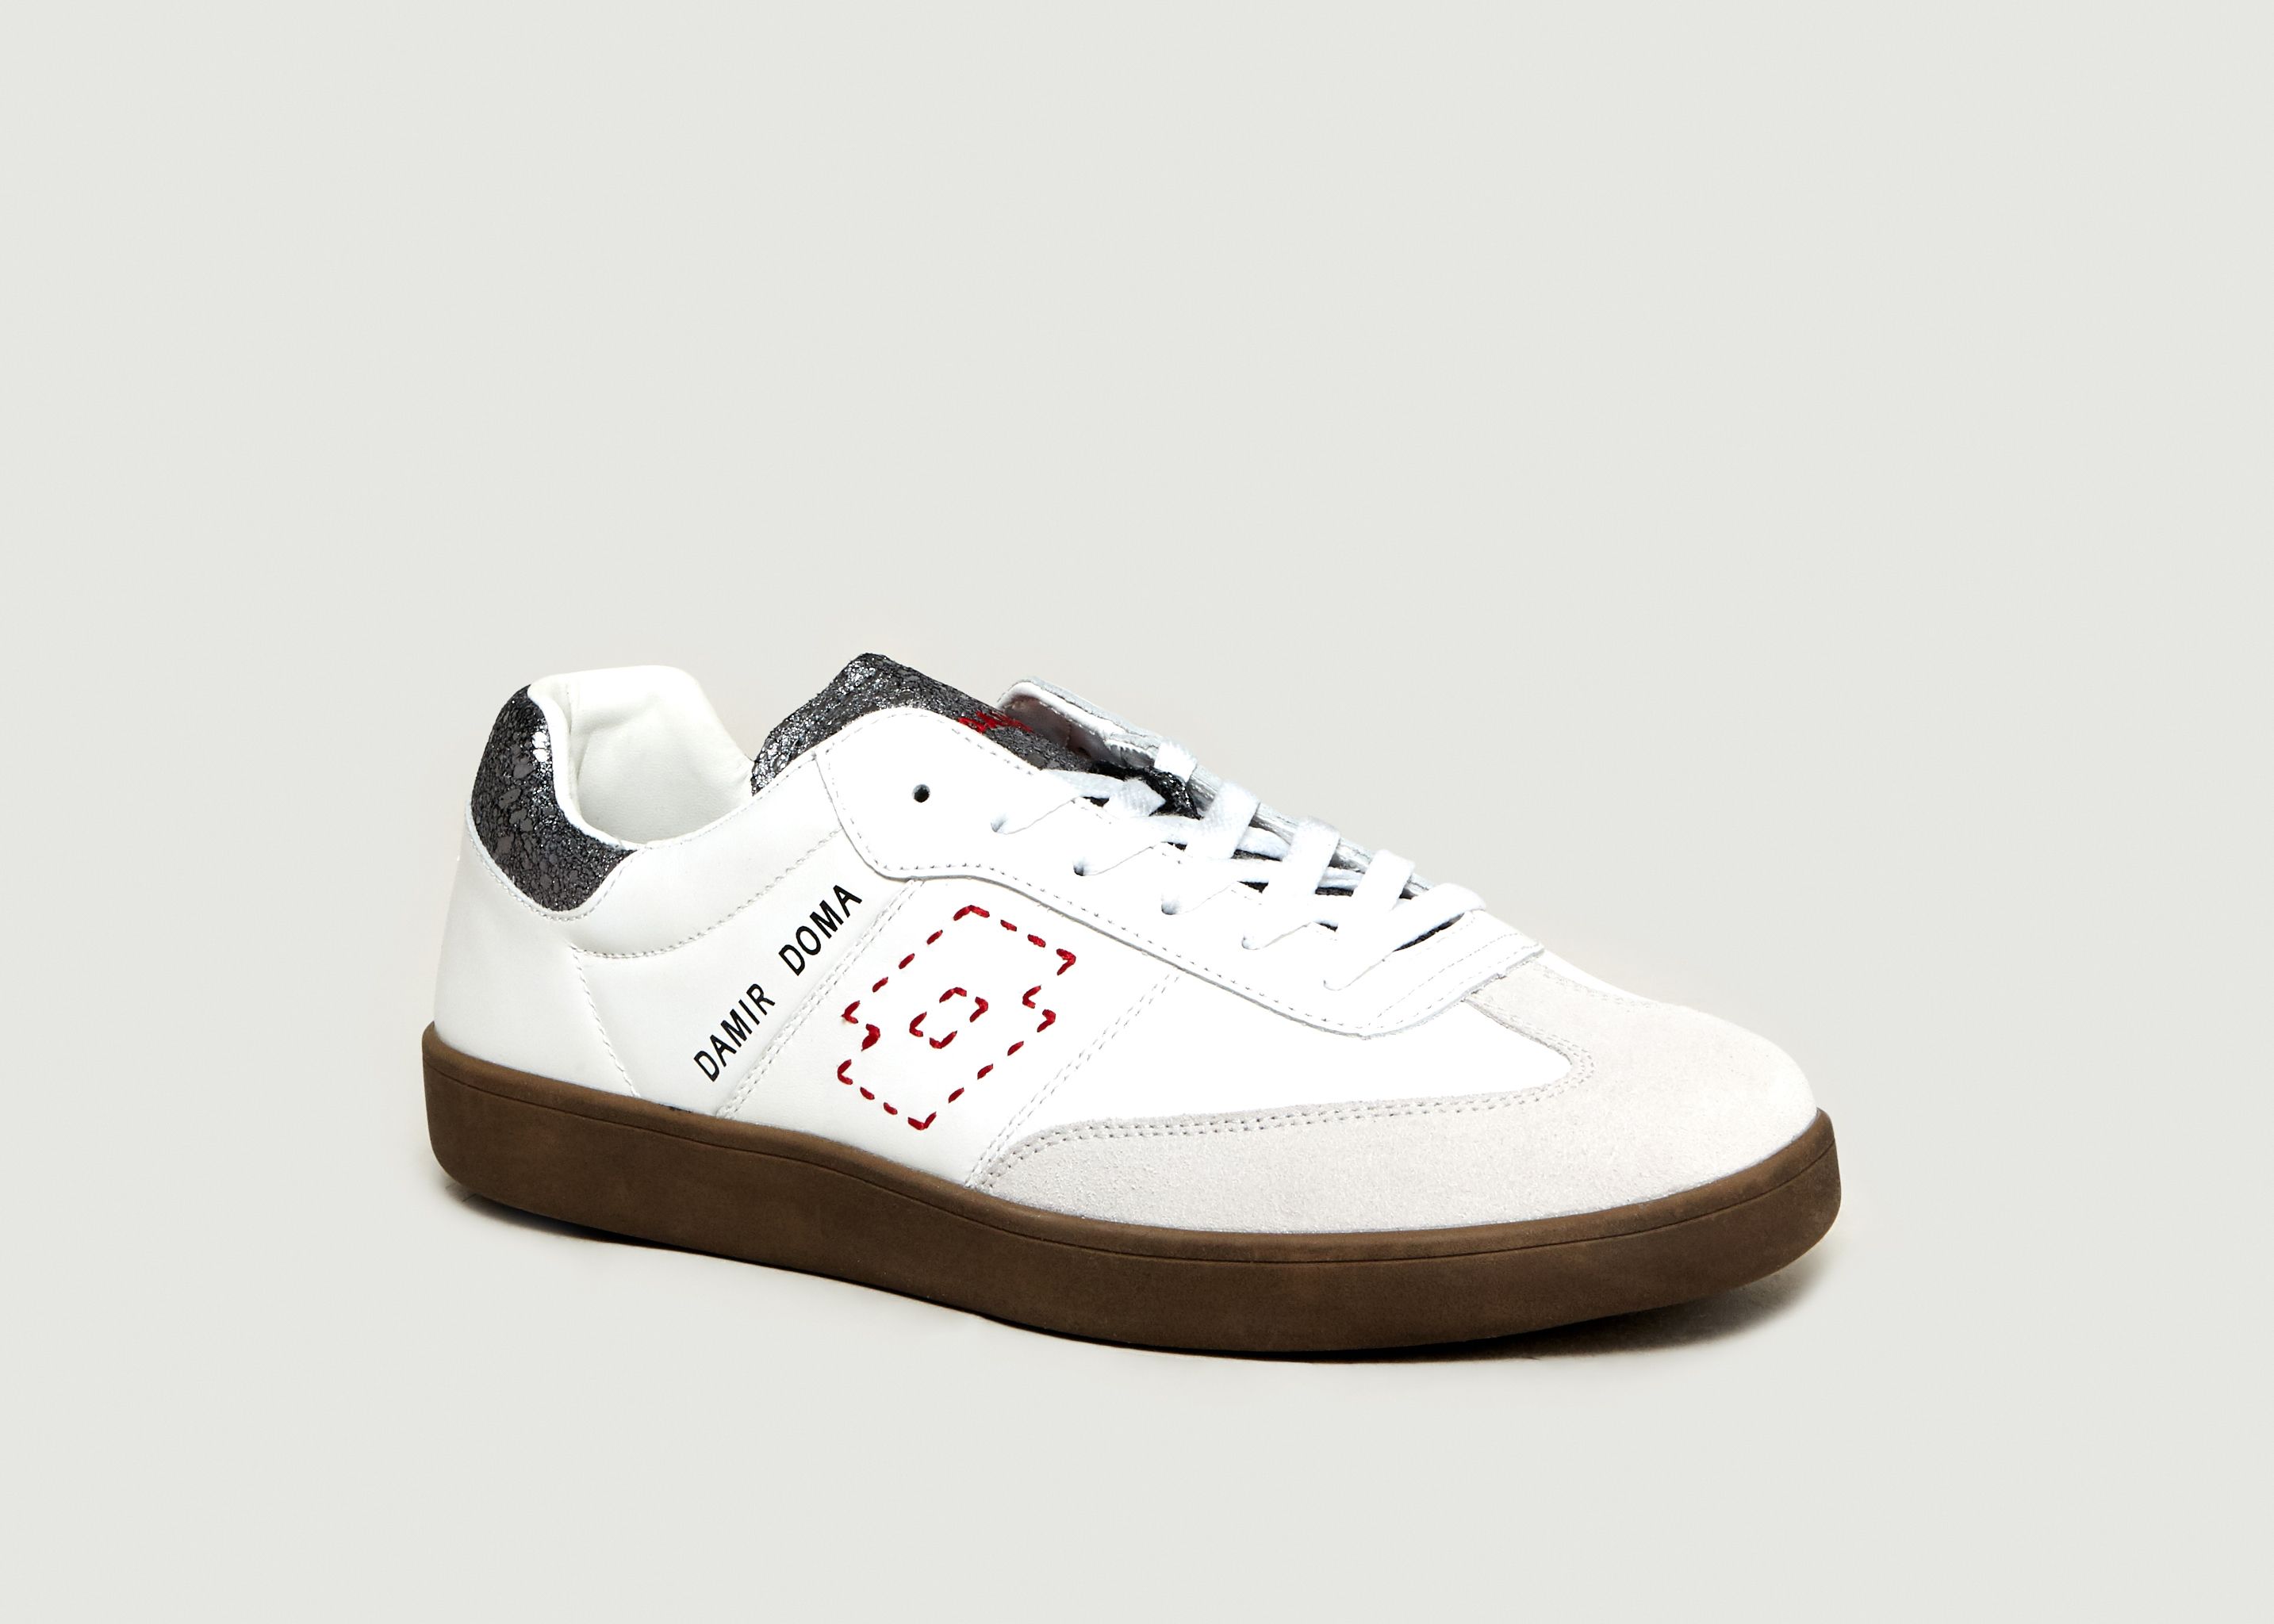 Brazil Select DD Trainers - Damir Doma x Lotto